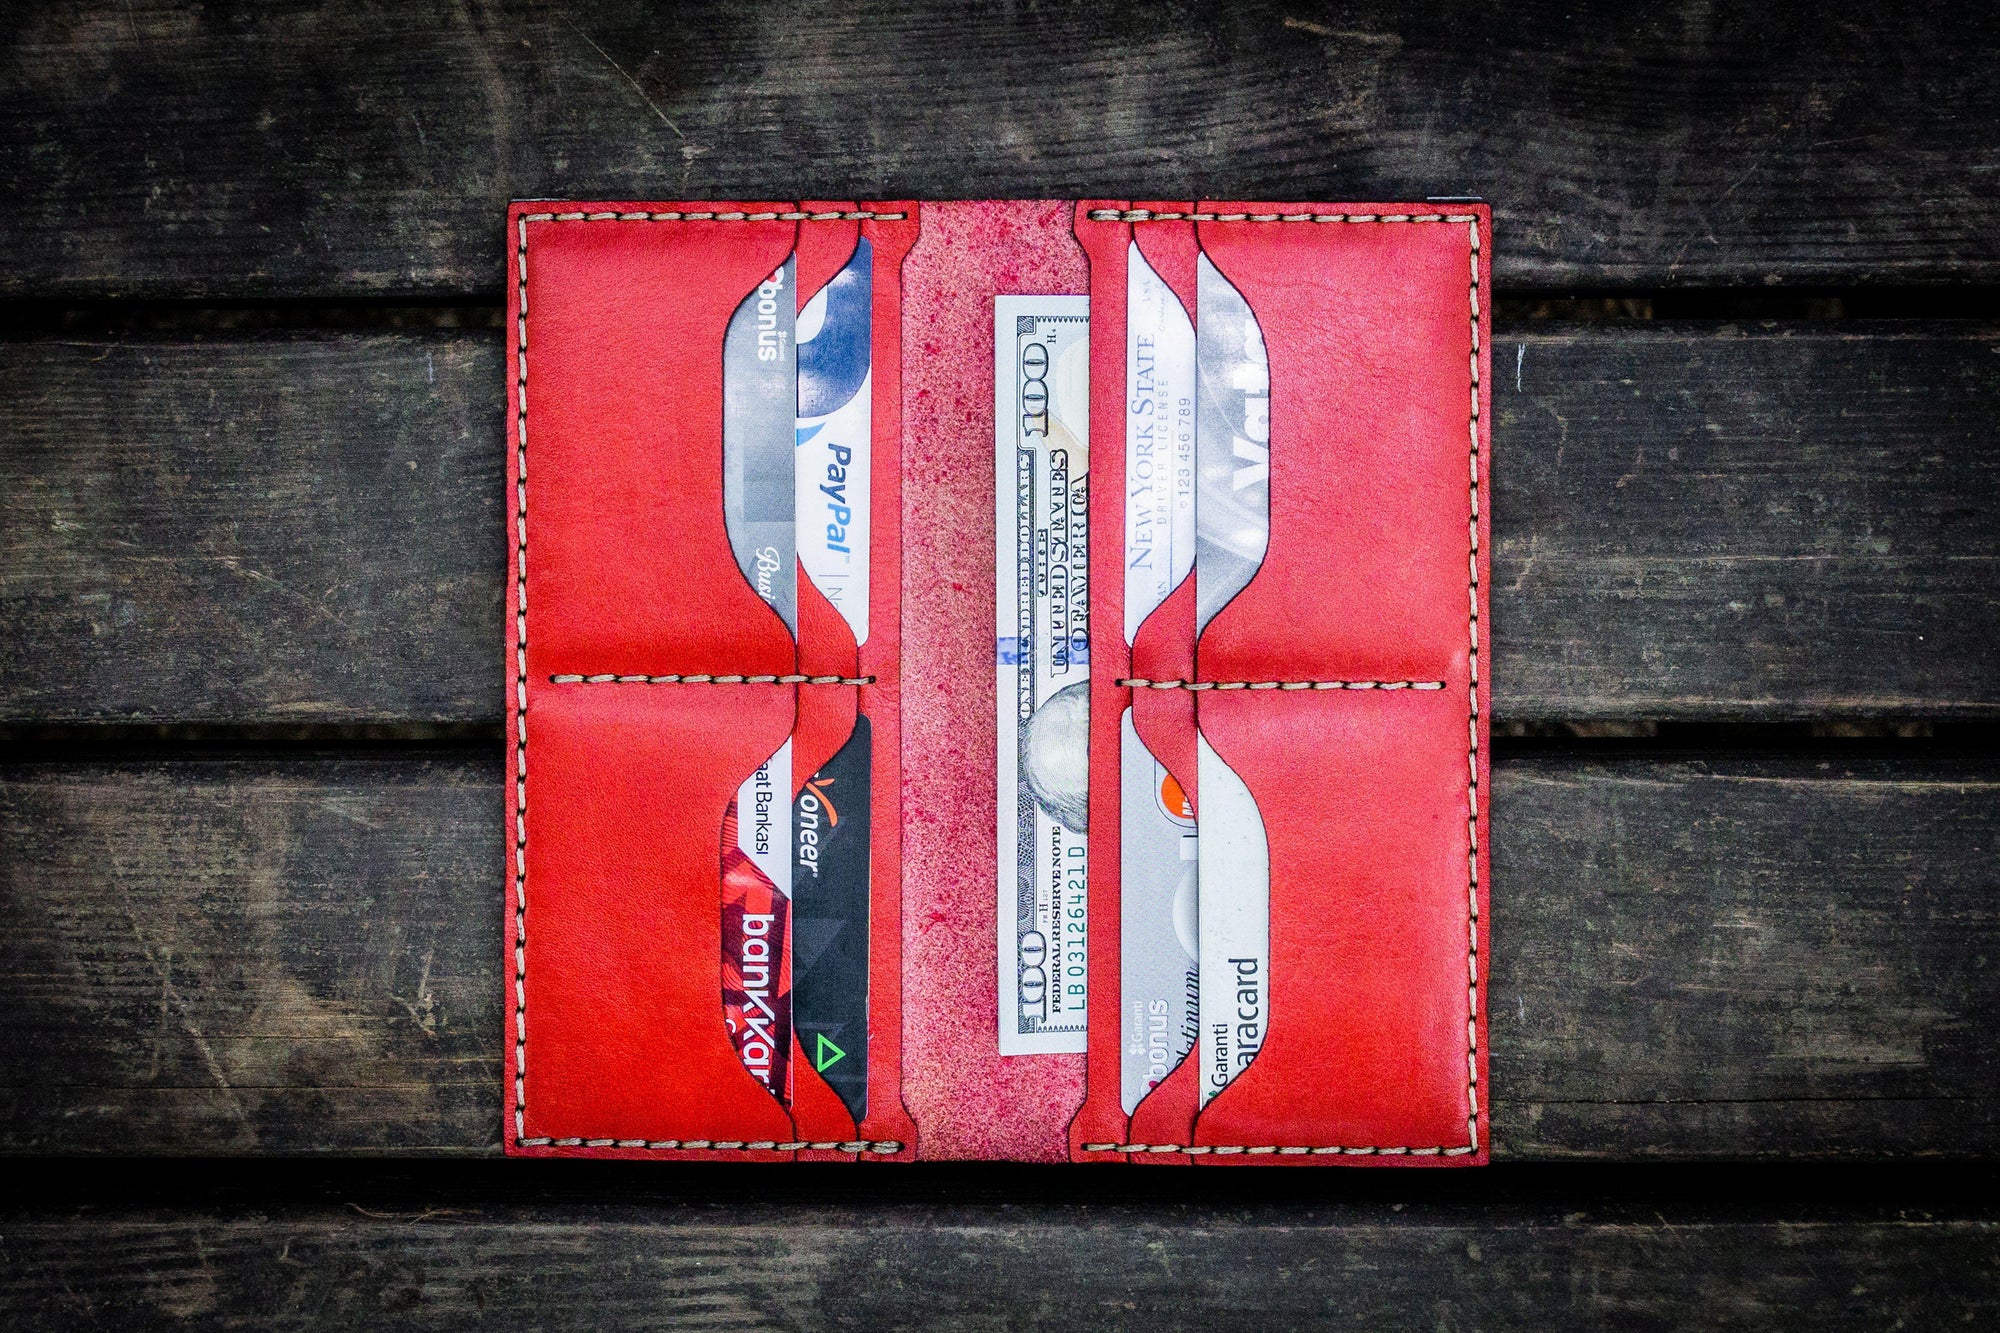 No.49 Handmade Leather Women Wallet - Red-Galen Leather